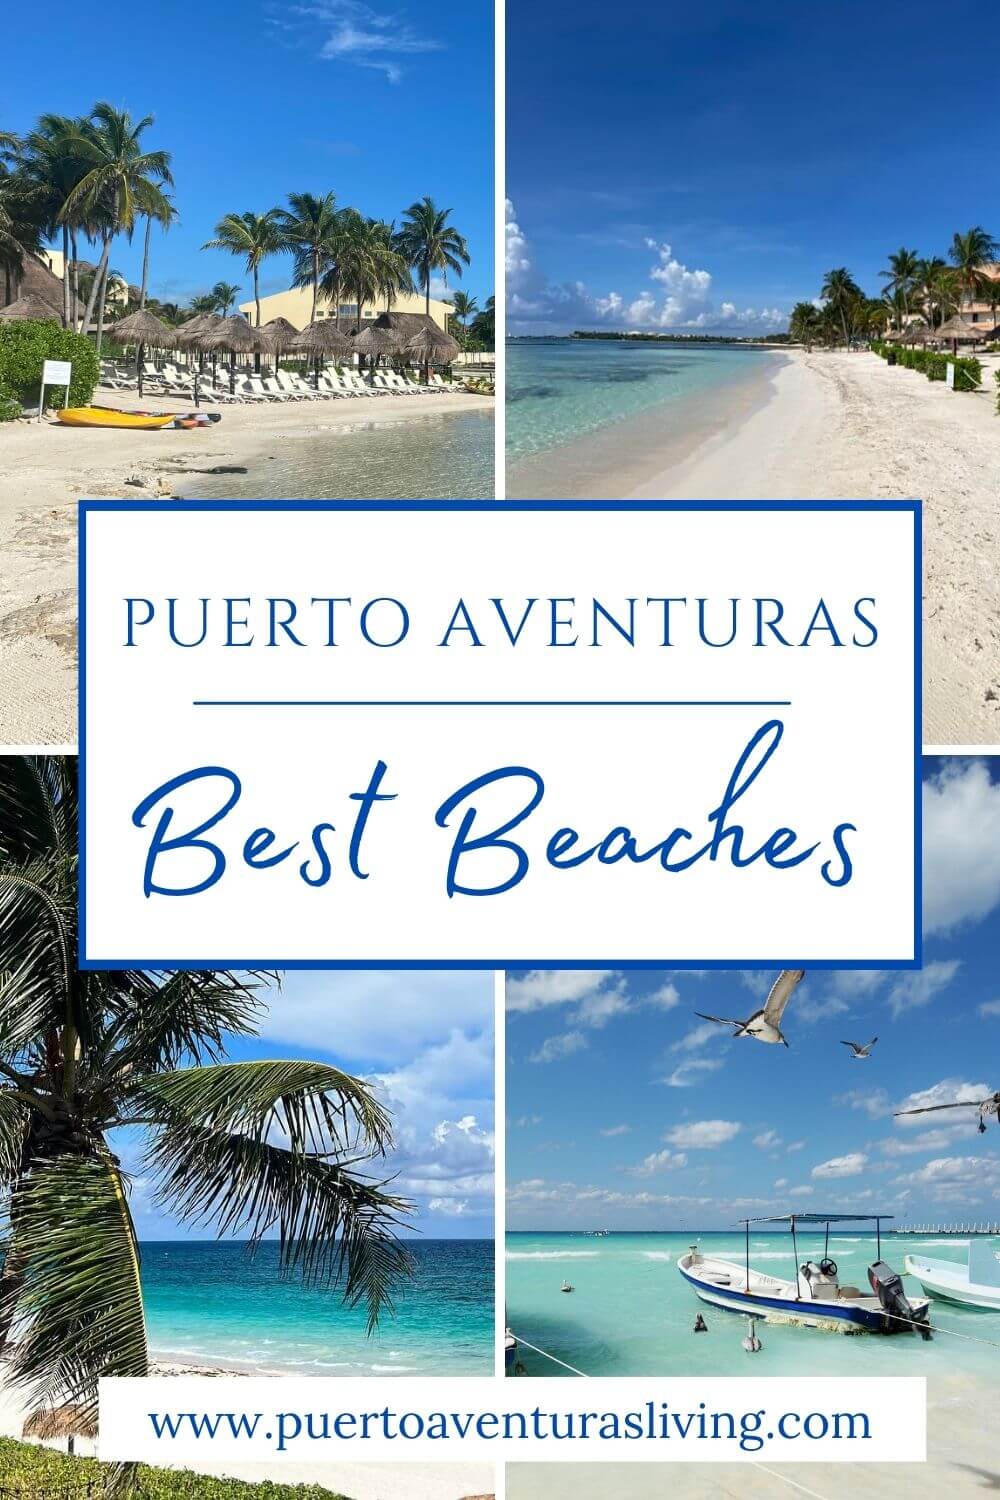 Four different beaches in and around Puerto Aventuras